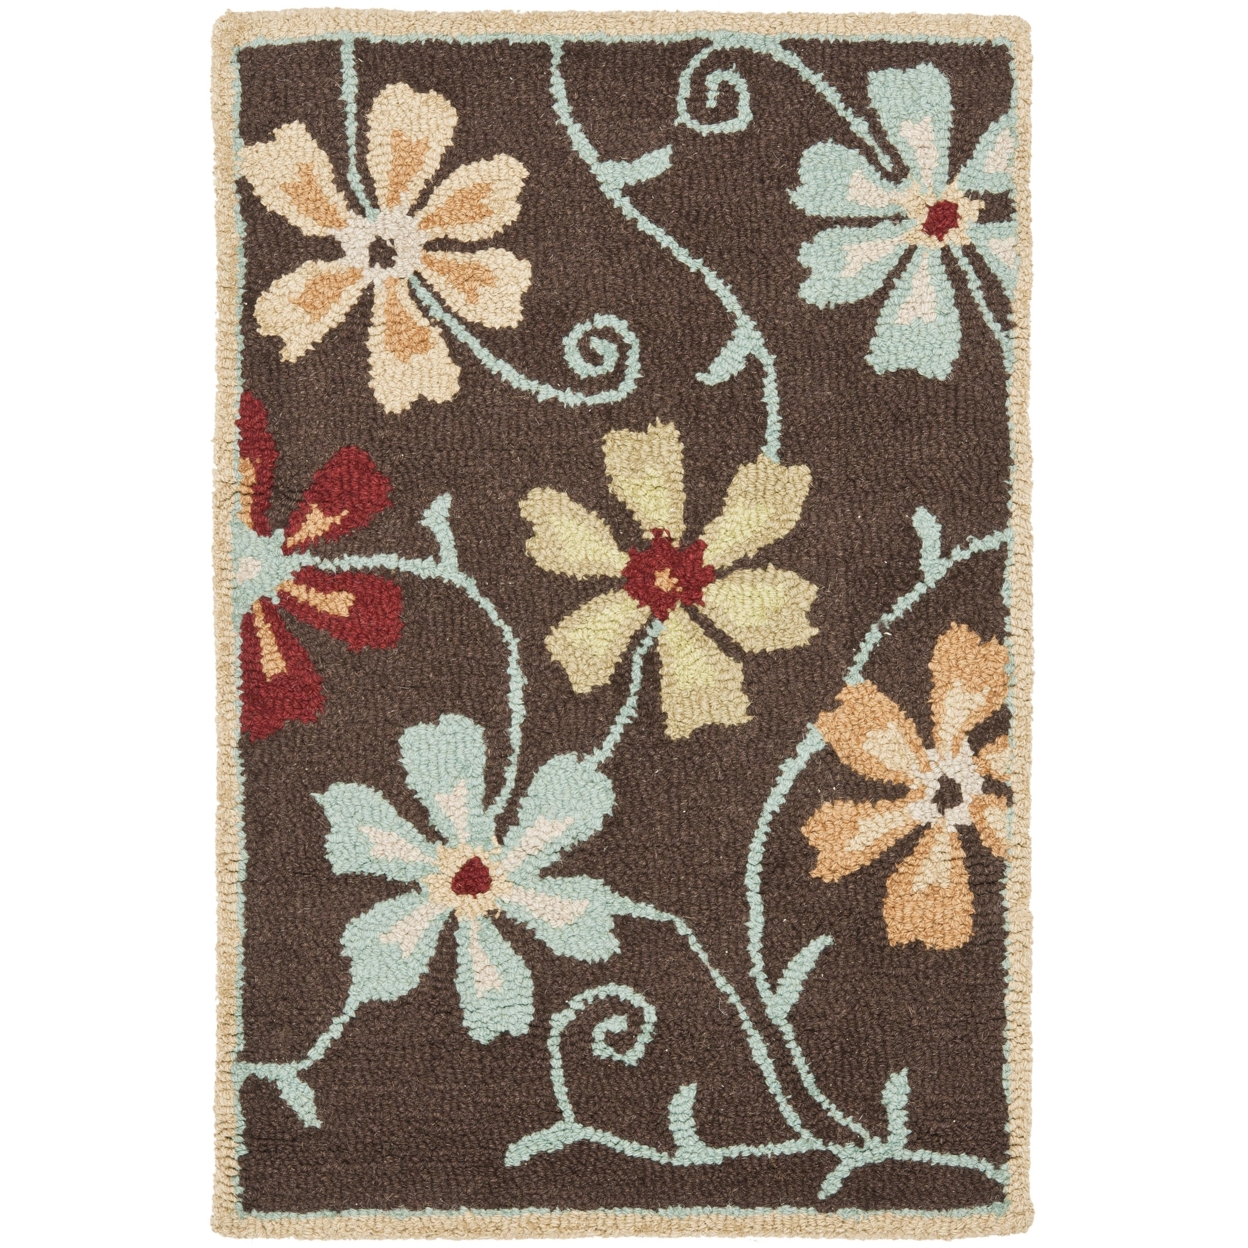 SAFAVIEH Blossom BLM784A Hand-hooked Brown / Multi Rug - 6' Square